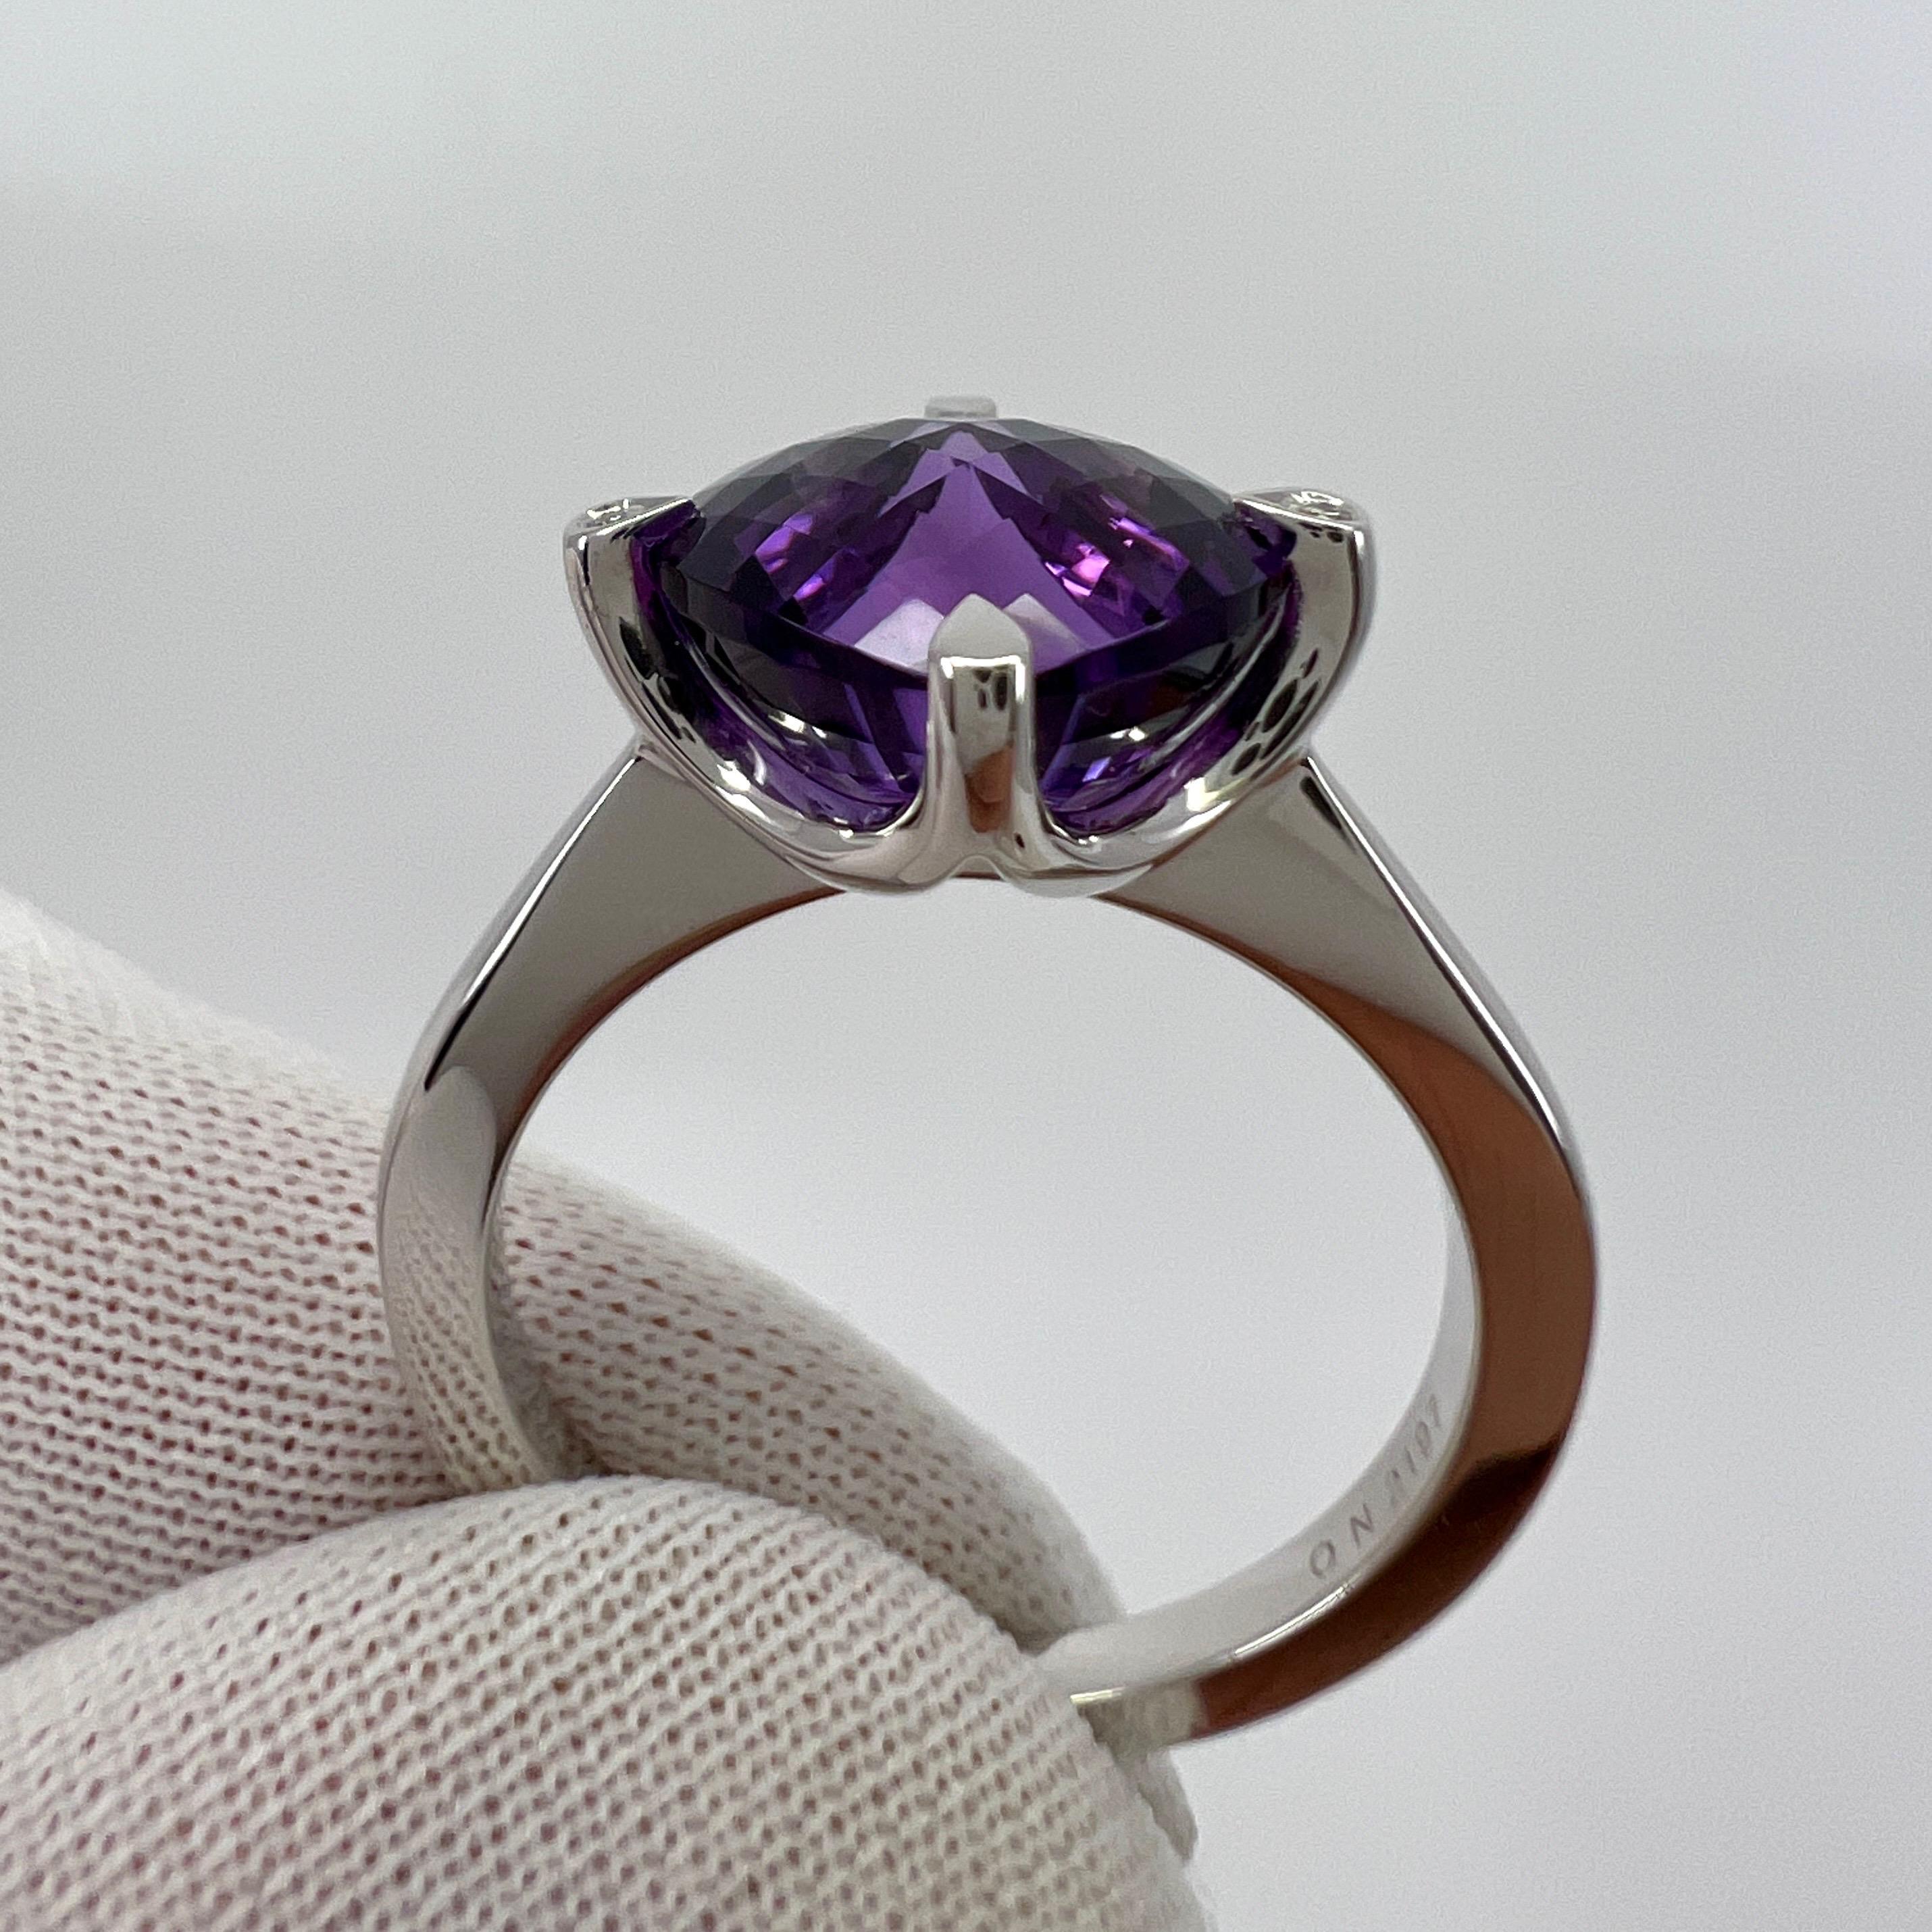 Rare Cartier Inde Mysterieuse Fancy Purple Amethyst Diamond 18k White Gold Ring 3